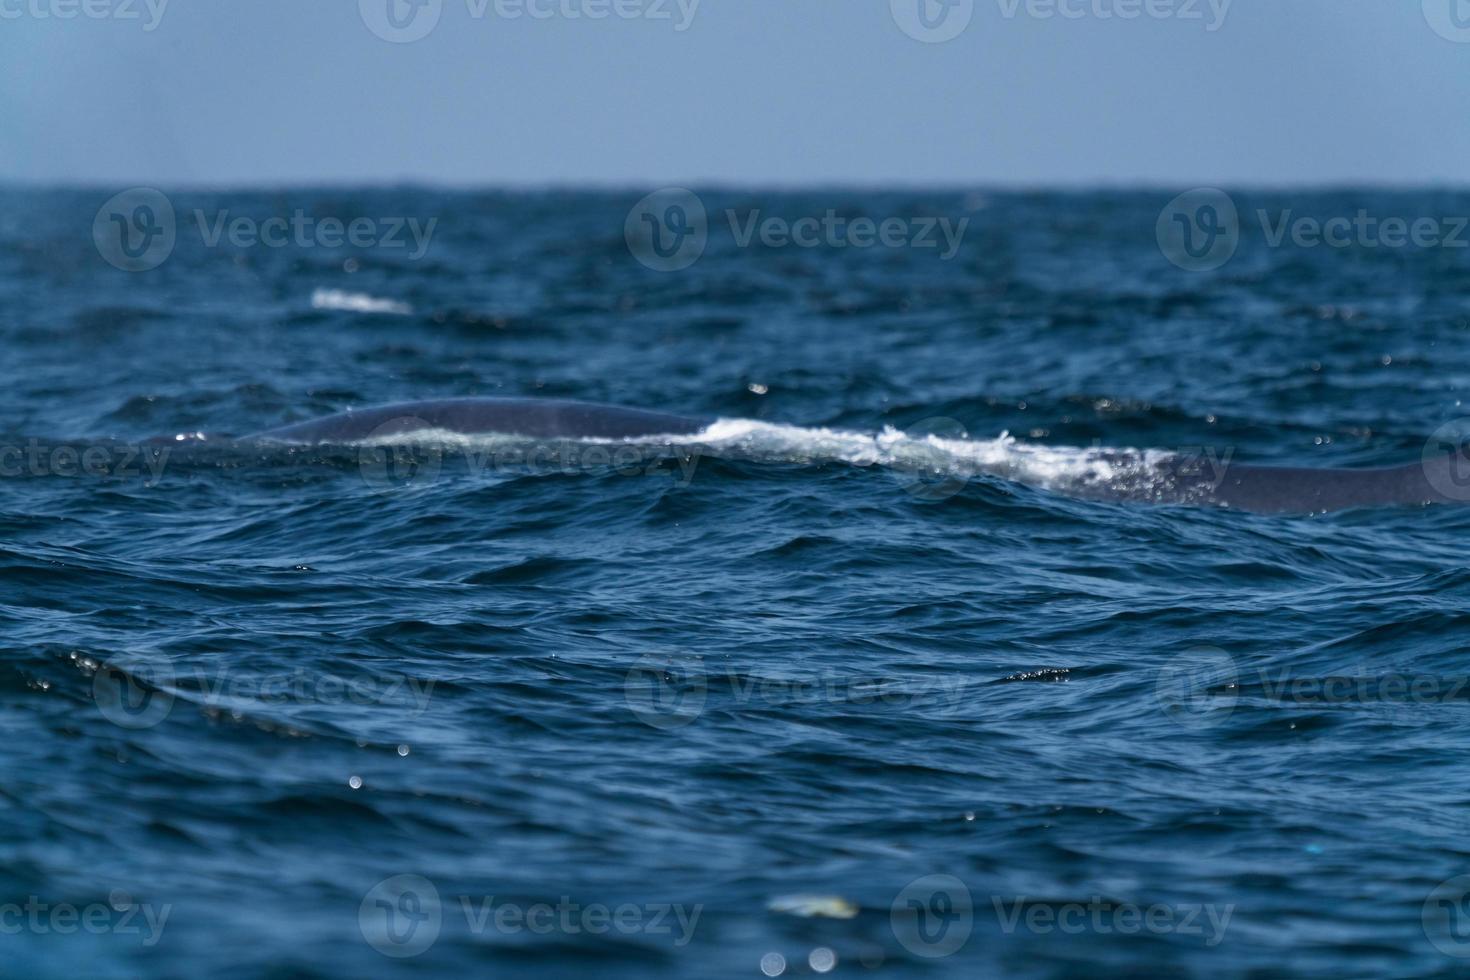 Bruda whale swimming up to the surface showing at the gulf of Thailand photo